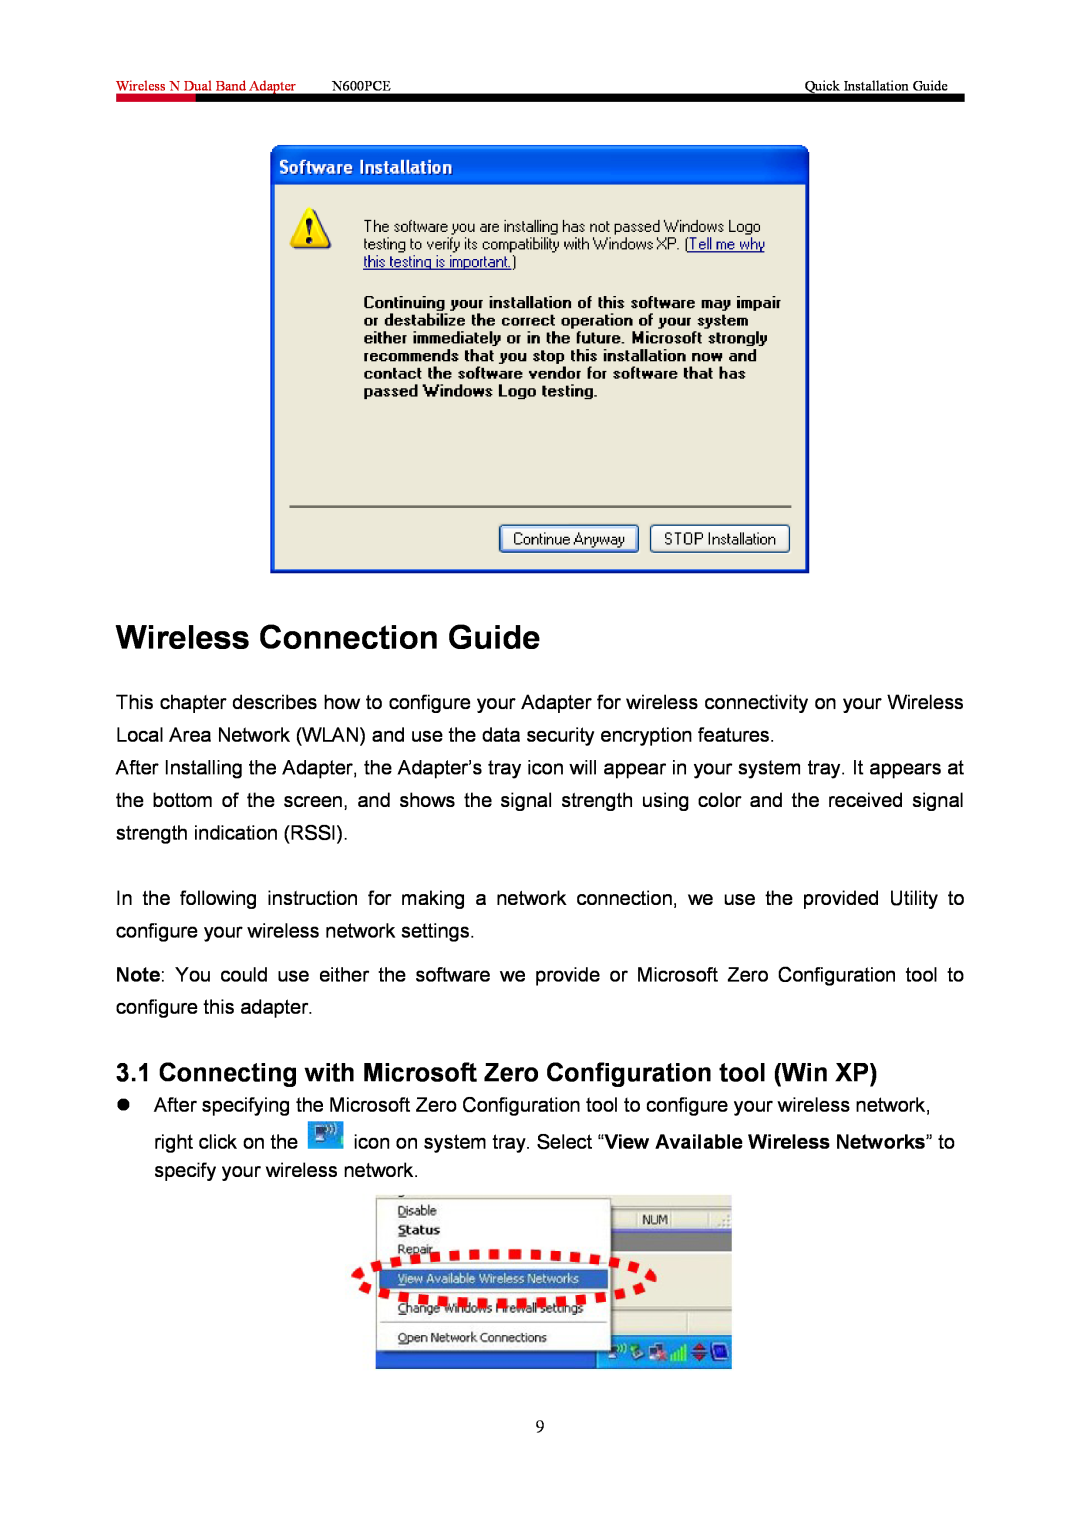 Rosewill N600PCE manual Wireless Connection Guide, Connecting with Microsoft Zero Configuration tool Win XP 